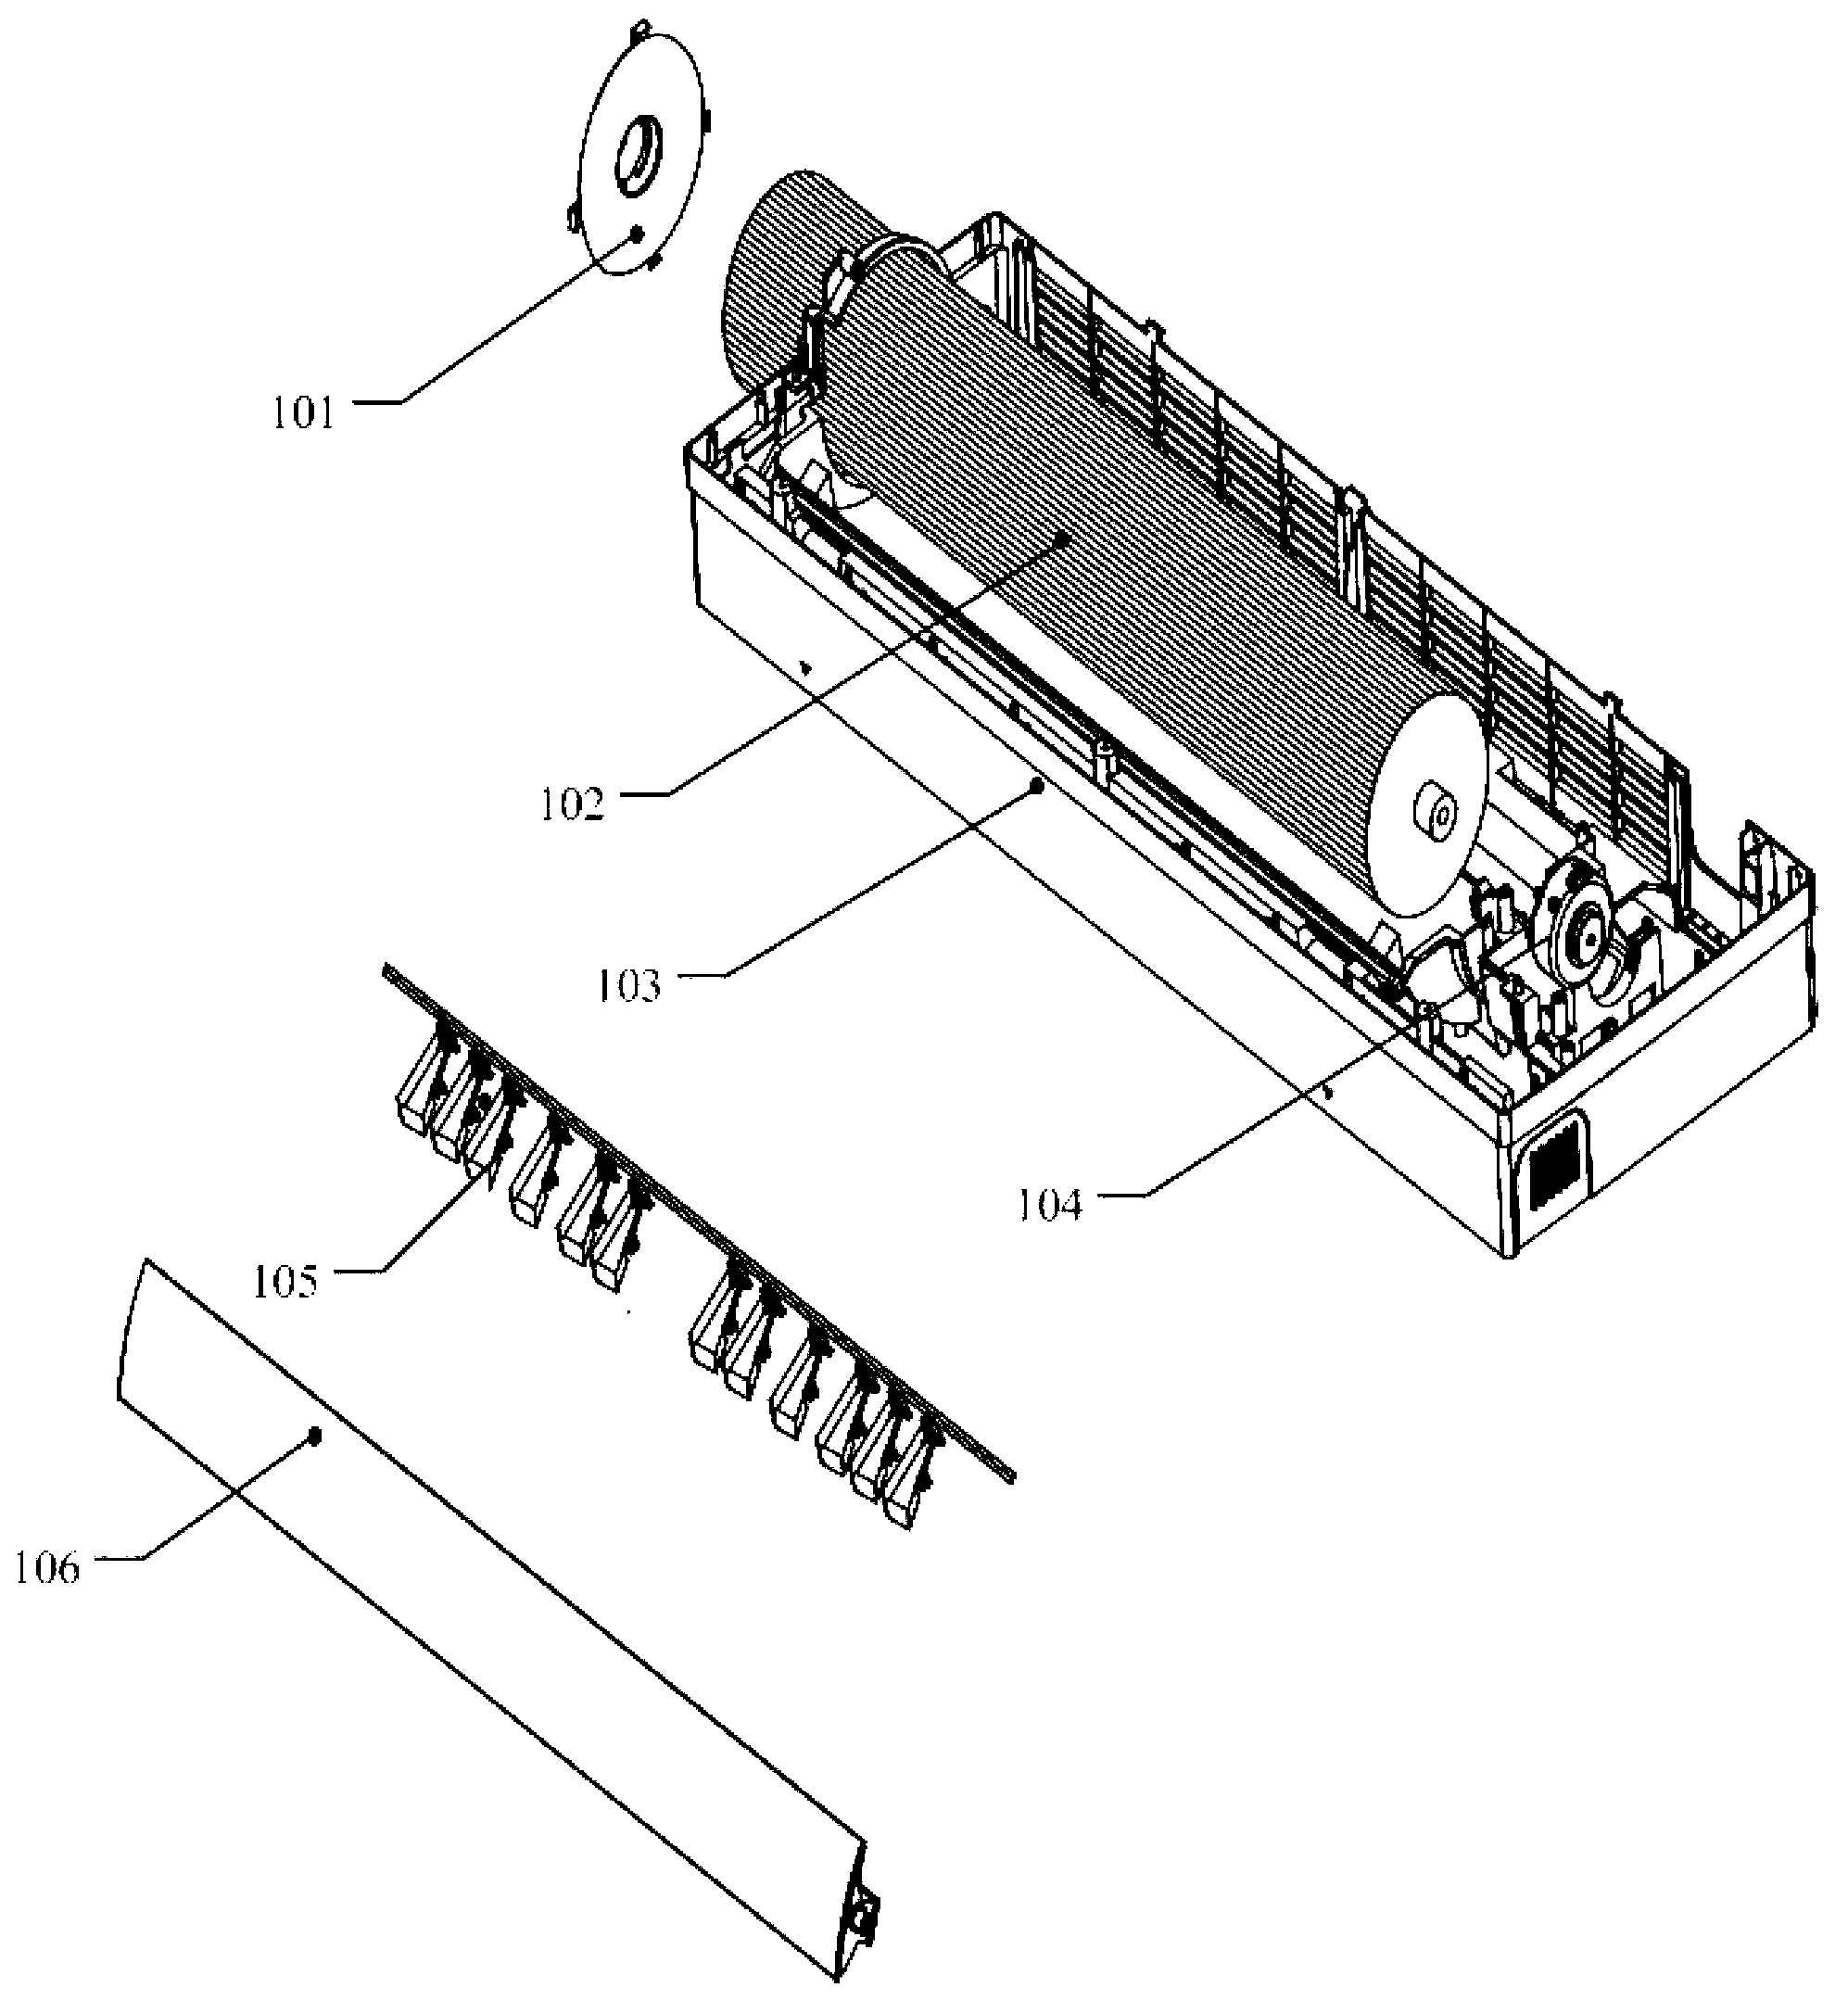 Air-conditioner wind rotor mechanism